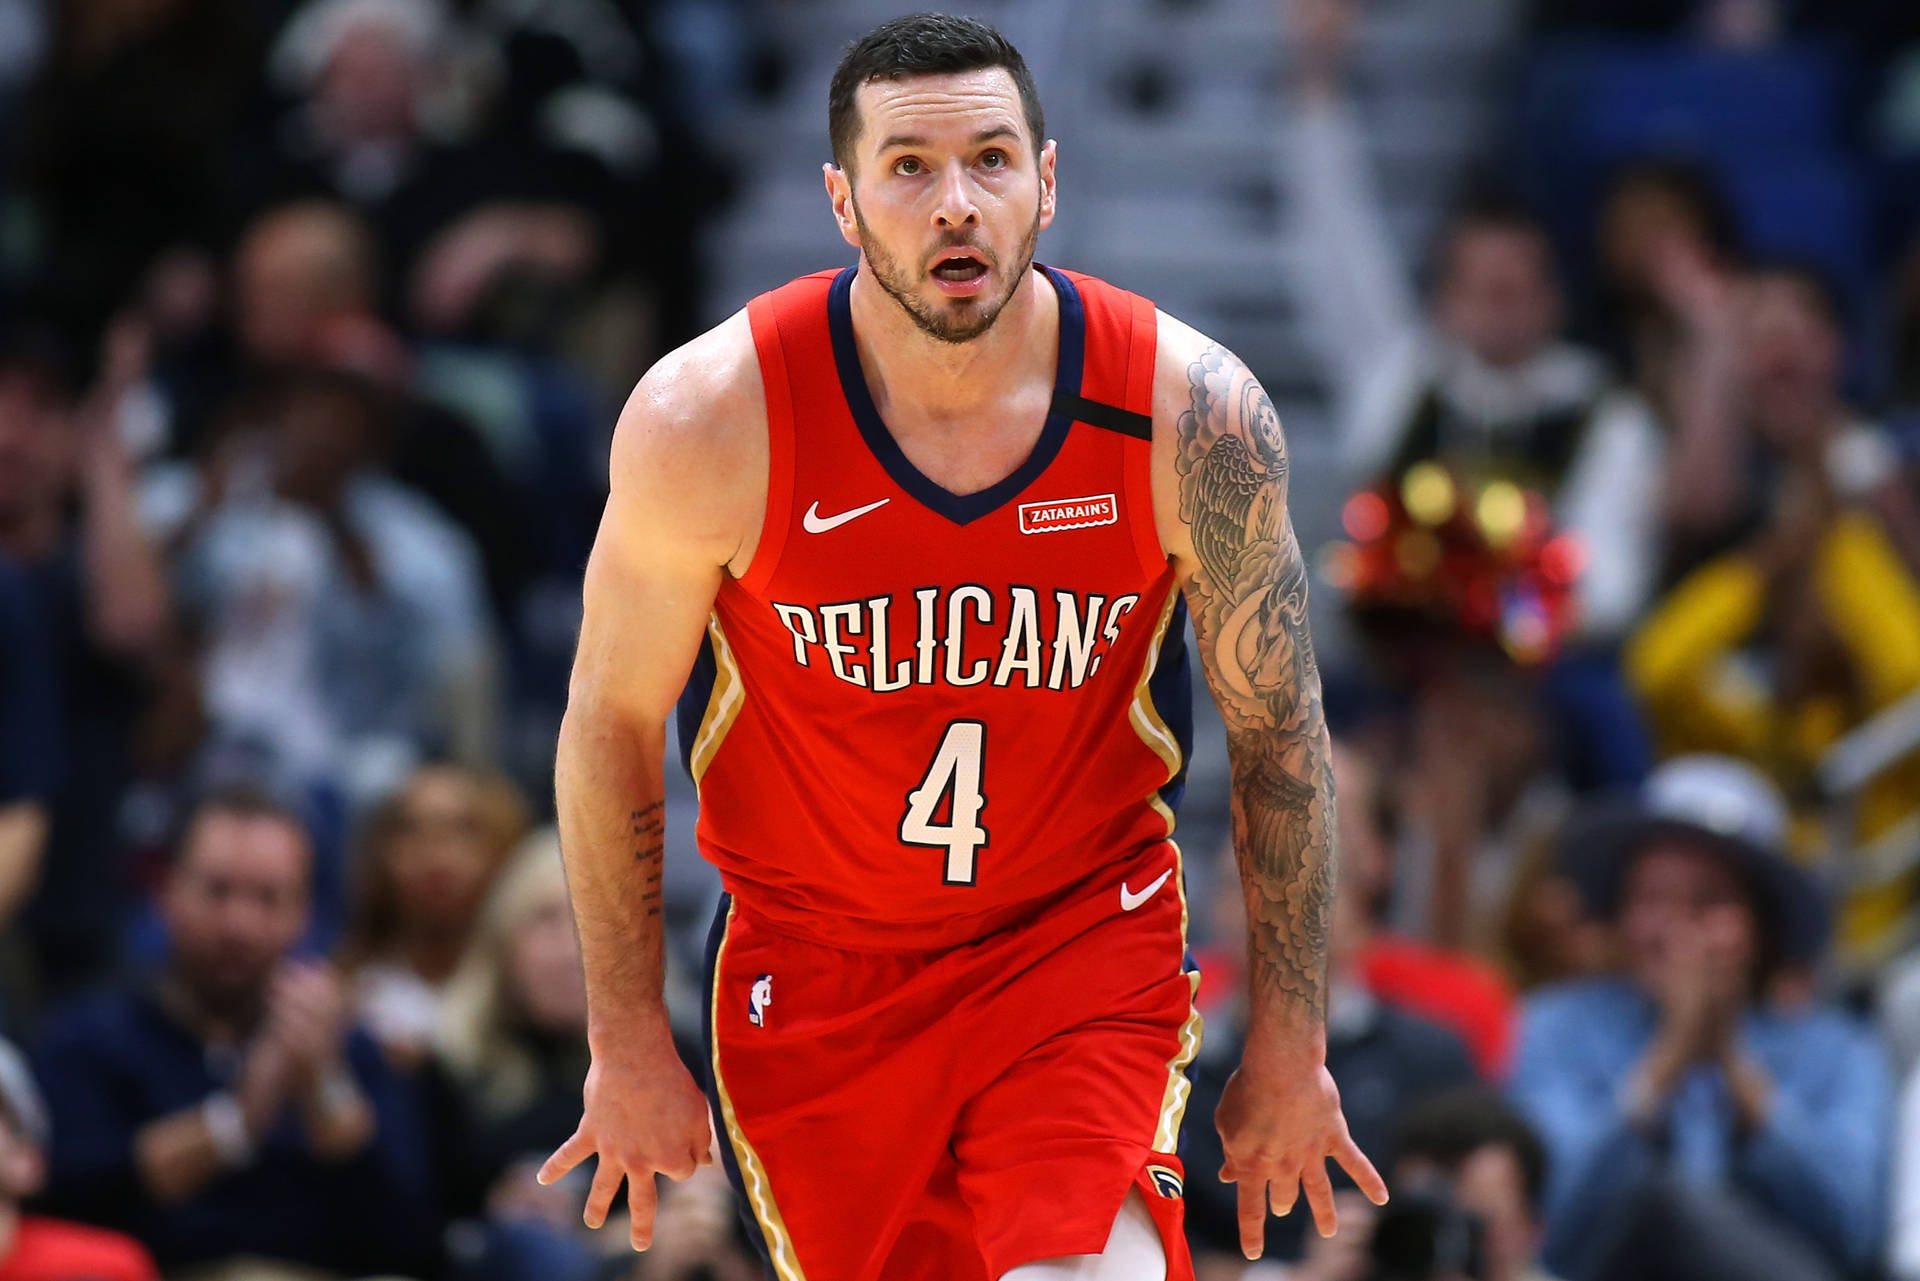 Jj Redick In Pelicans Red Jersey Background